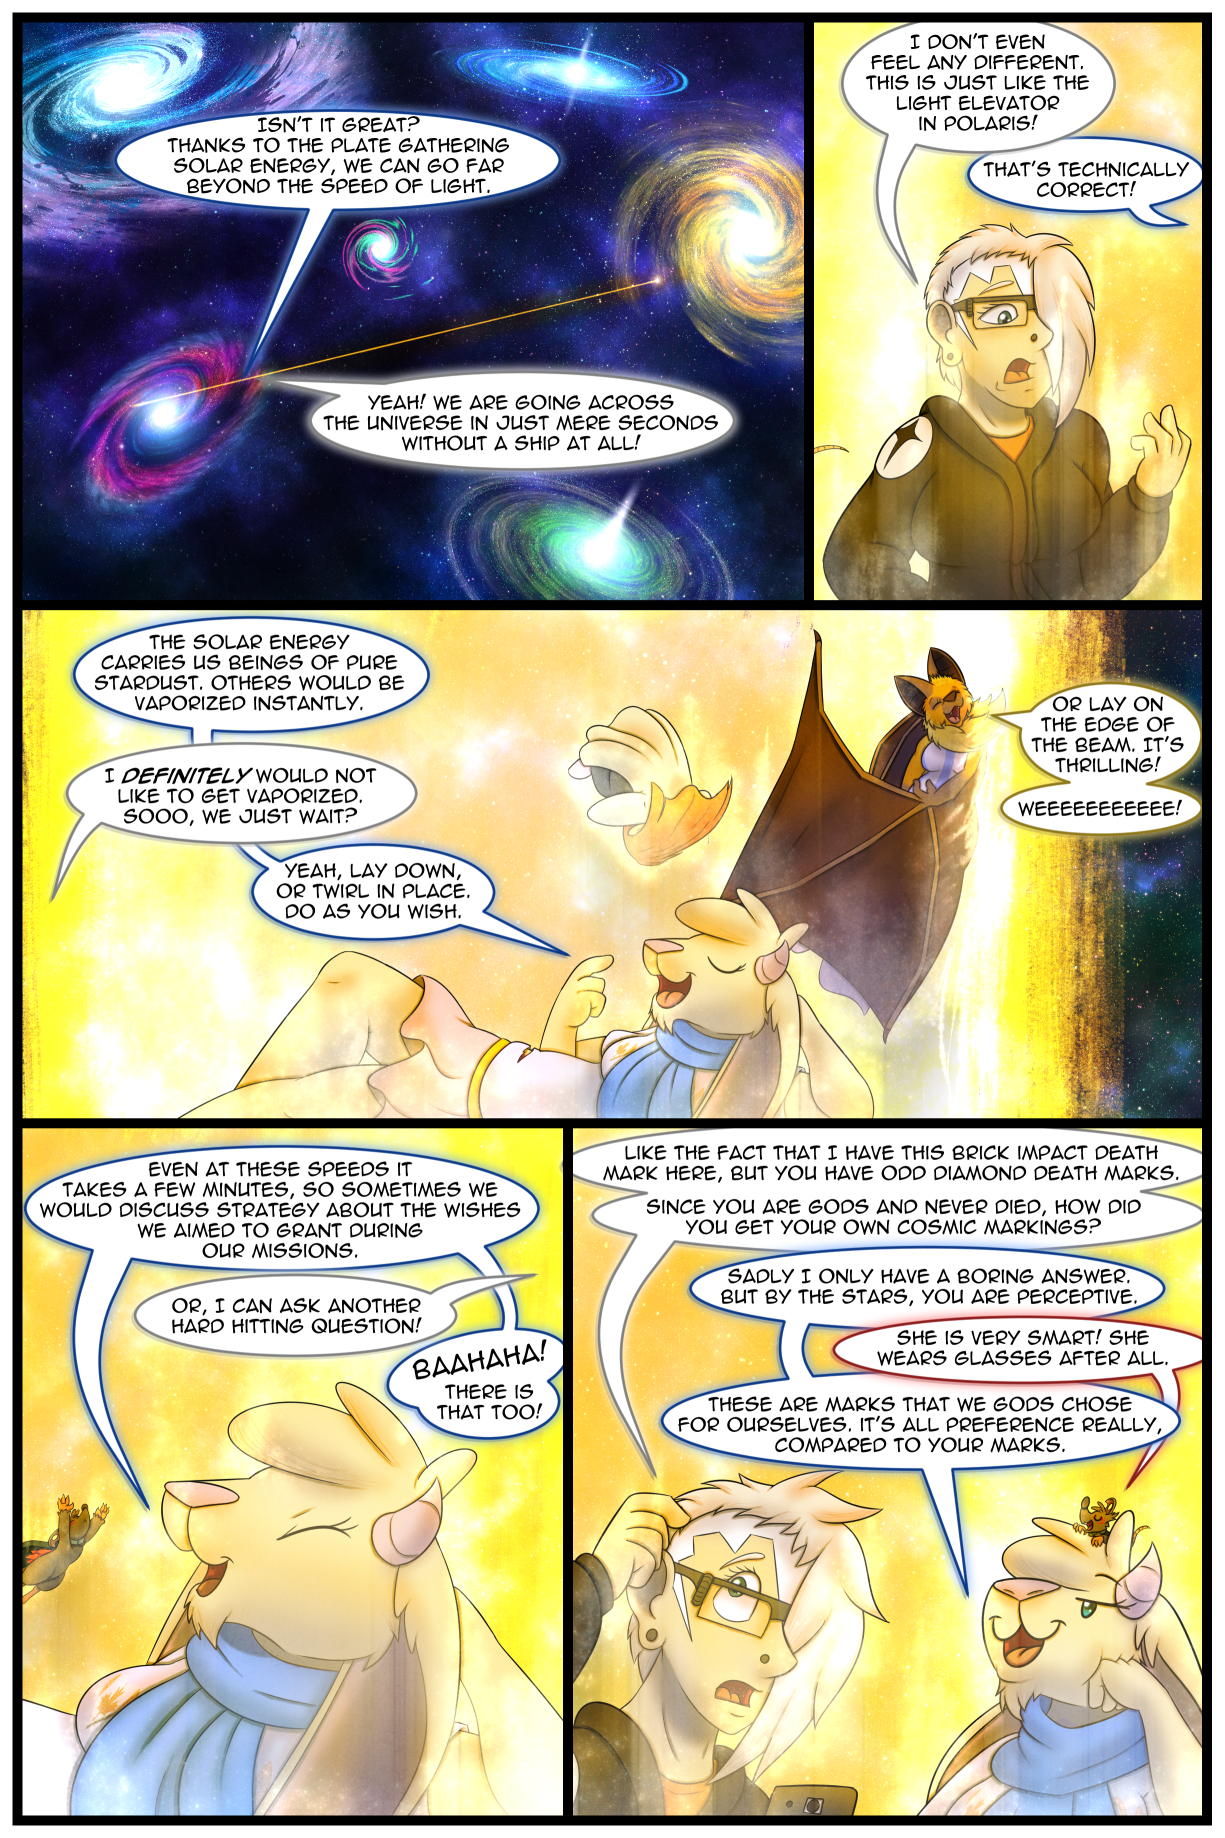 Ch6 Page 9 – Solar Travel